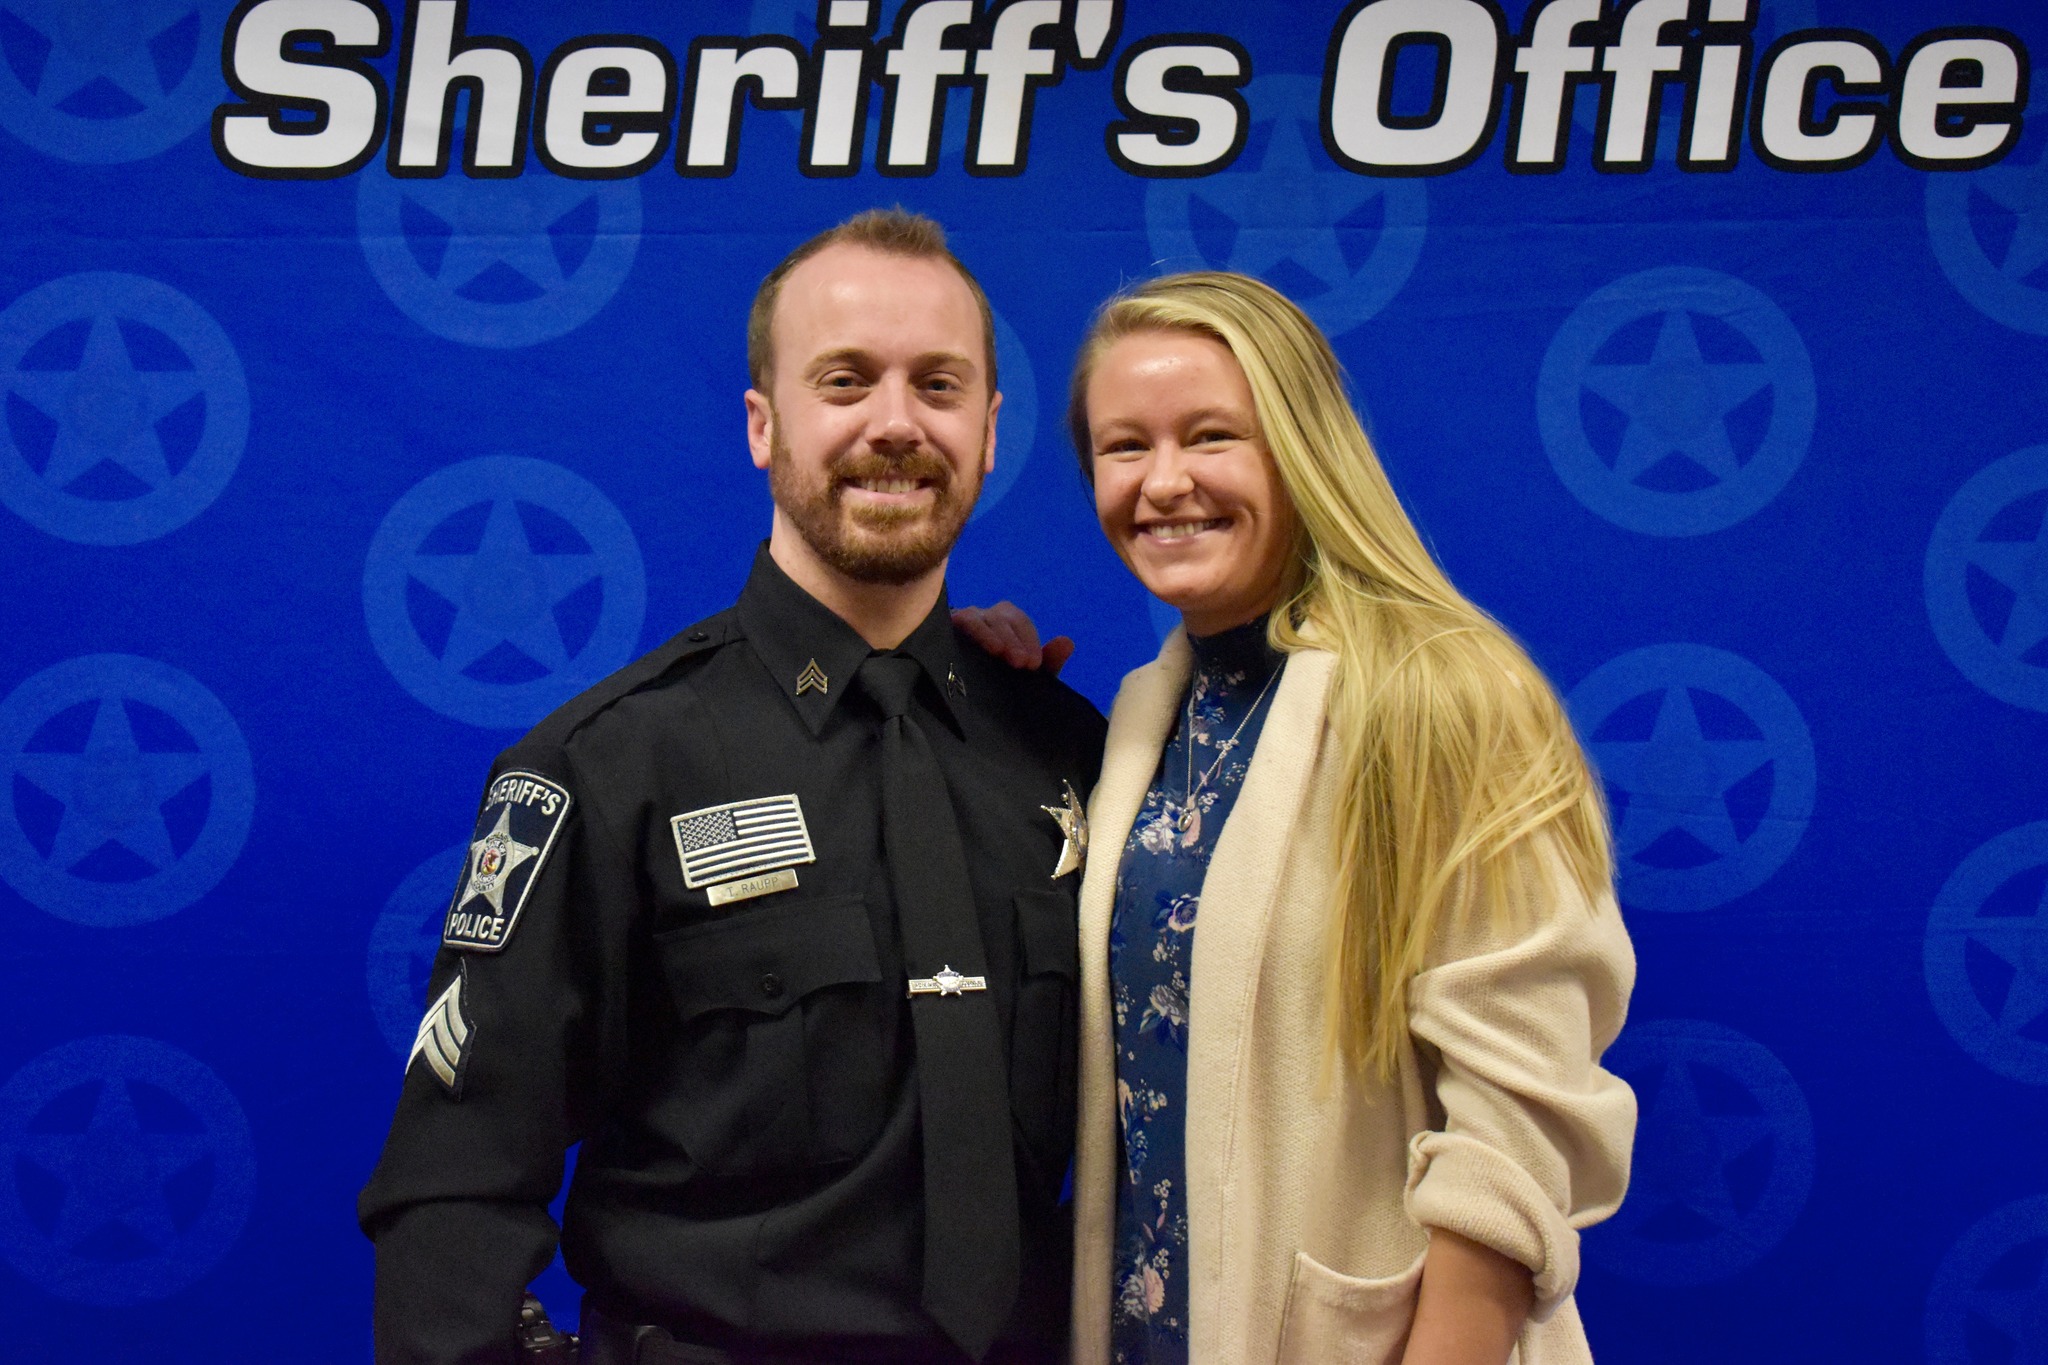 McHenry County Sheriff's Office Sergeant Trent Raupp and his wife pose for a photo shortly after he was promoted to hi new position in January